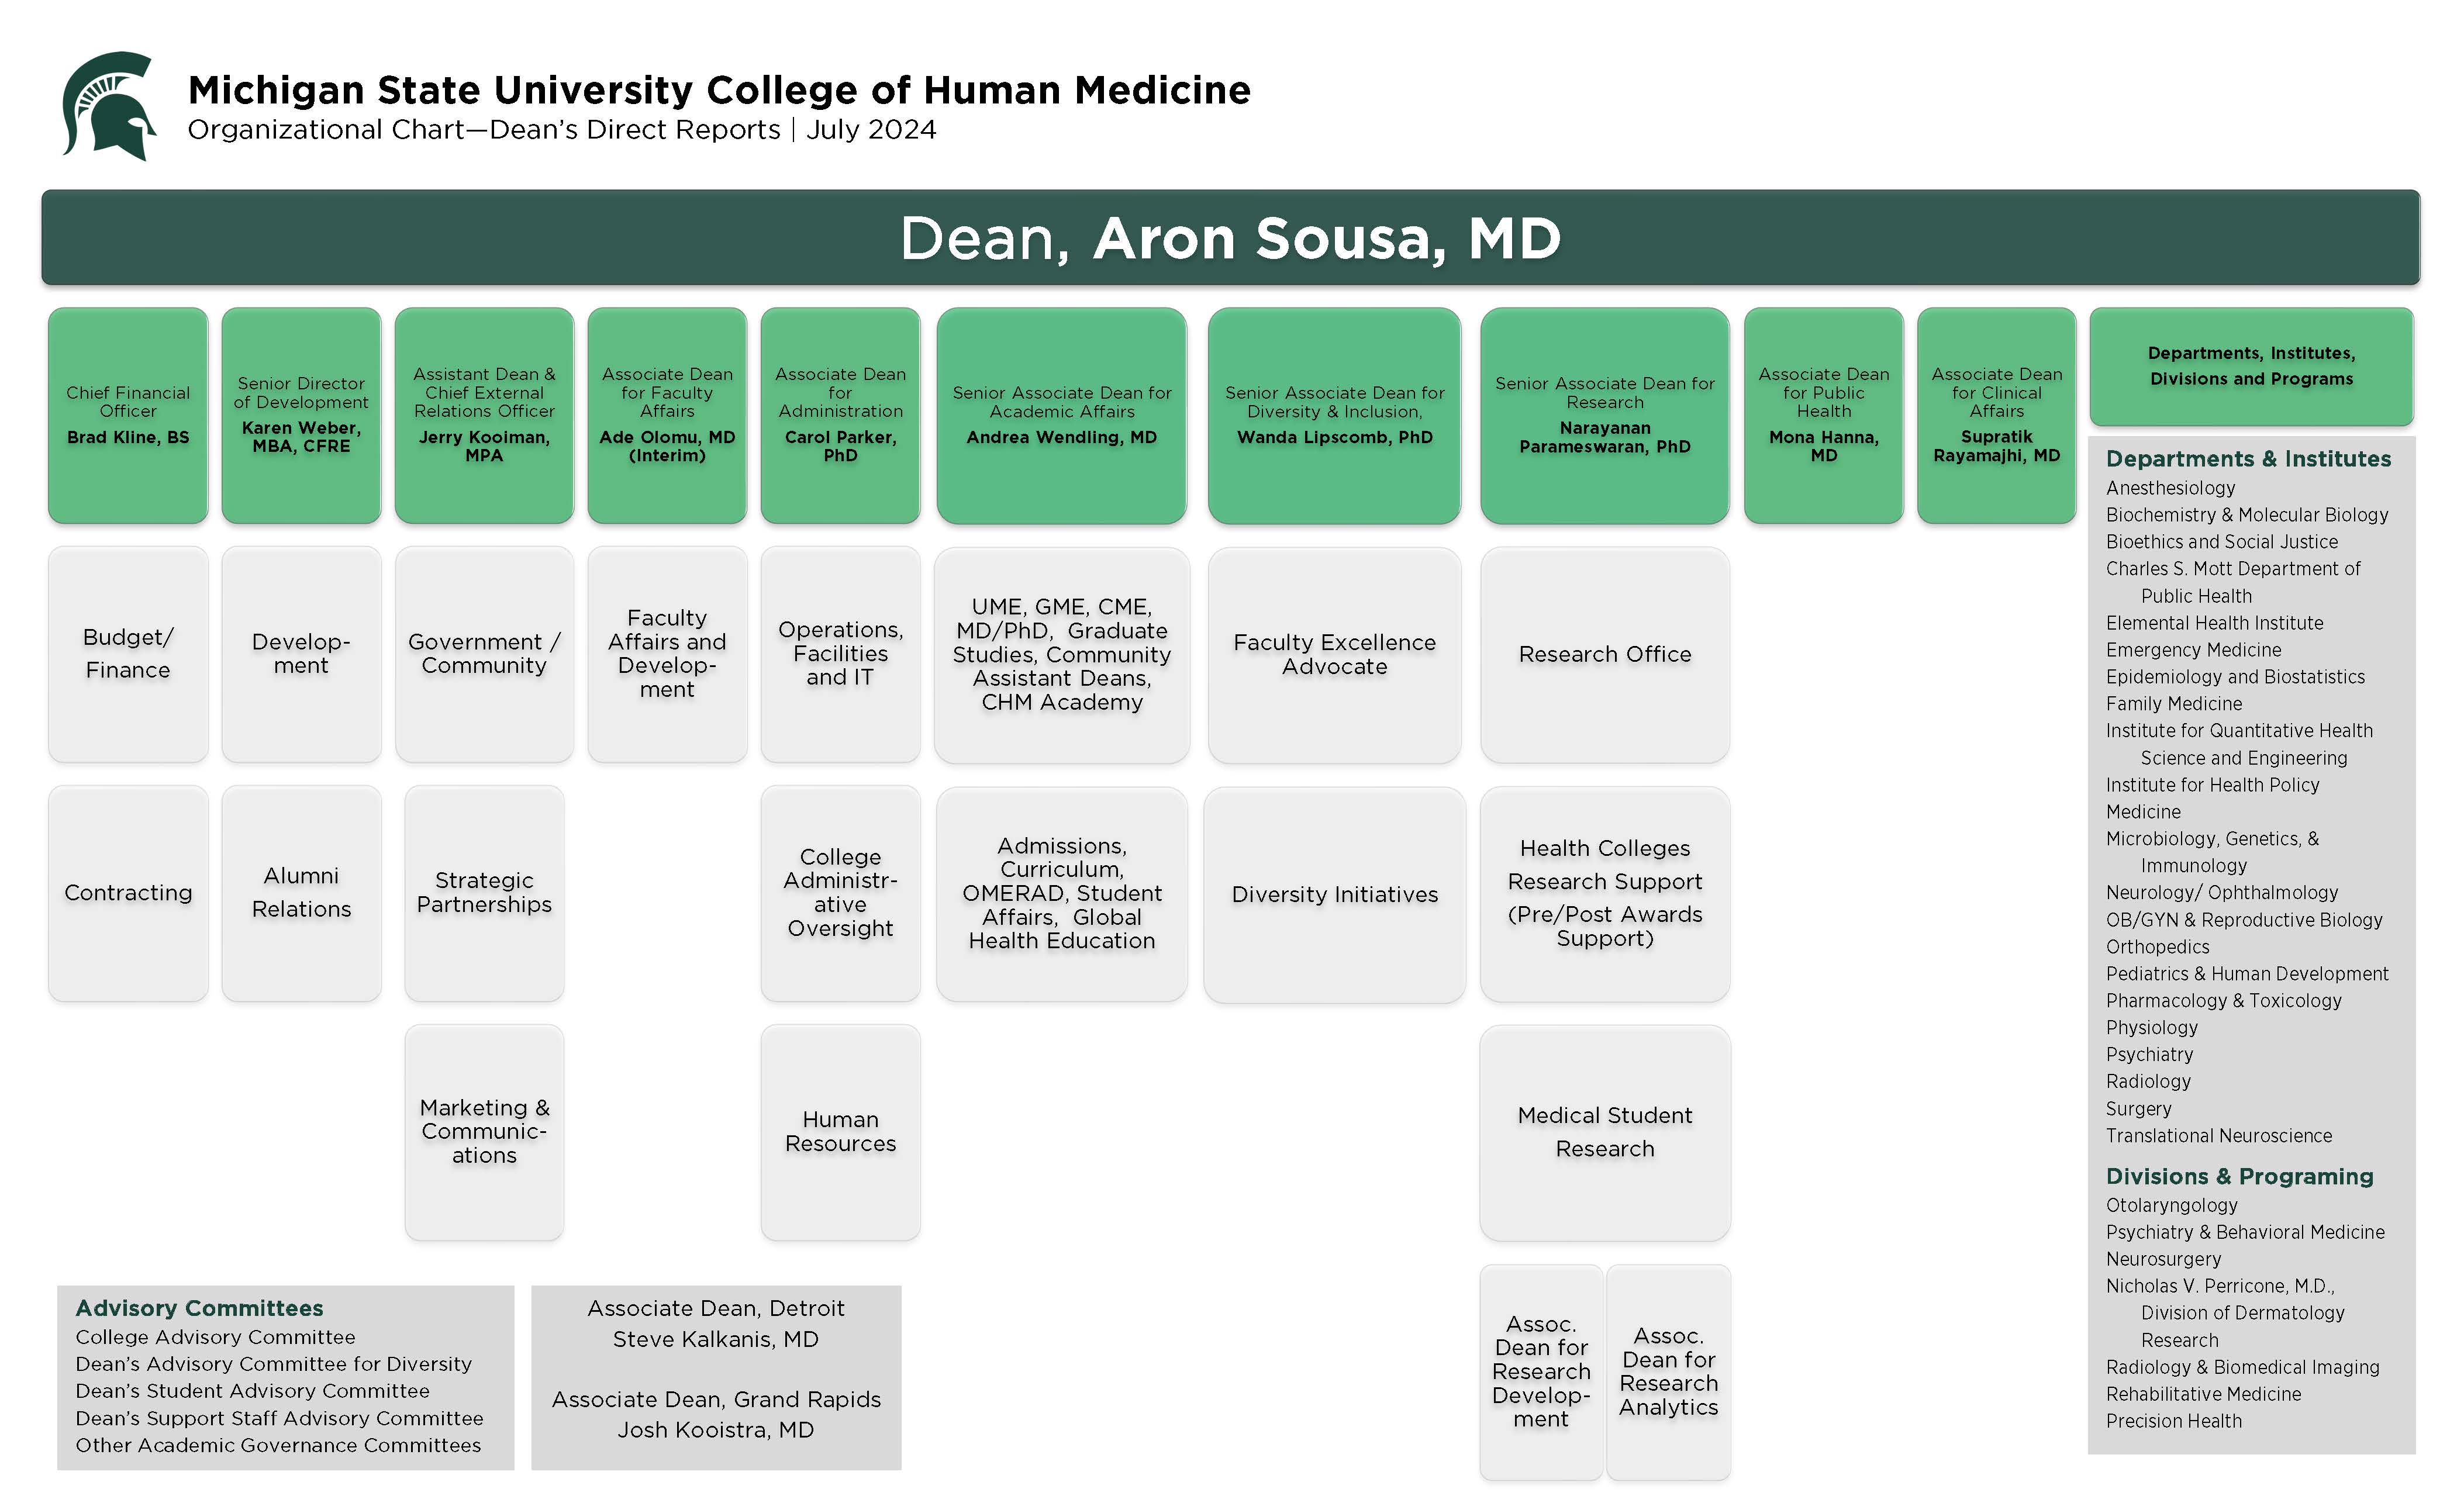 College of Human Medicine Org chart. Full alt text is listed below the image.